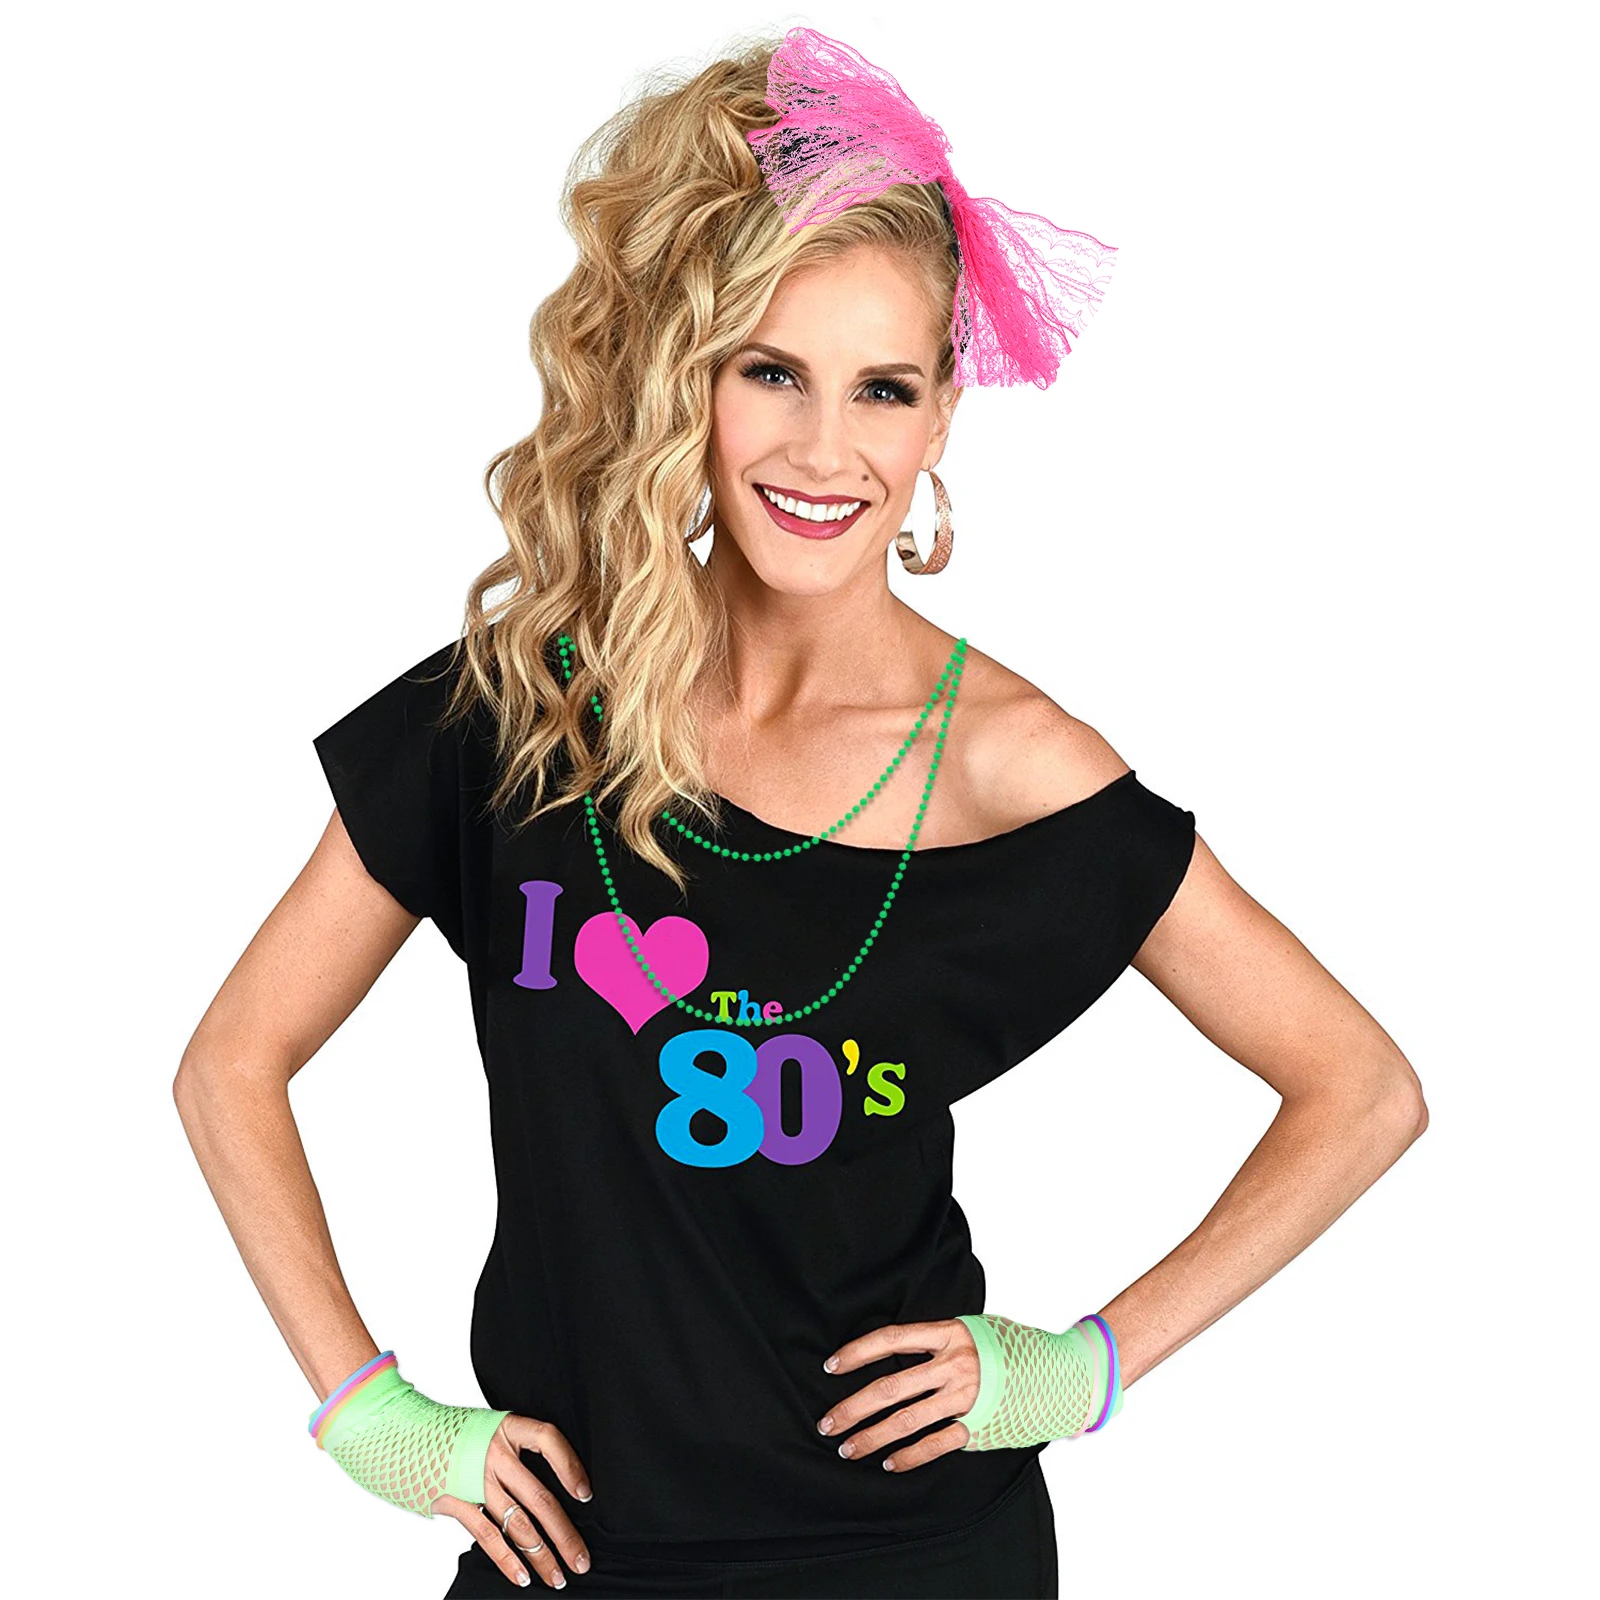 BACK TO THE 80s Ladies T-Shirt & Accessories Fancy Dress Costume Outfit Neon 